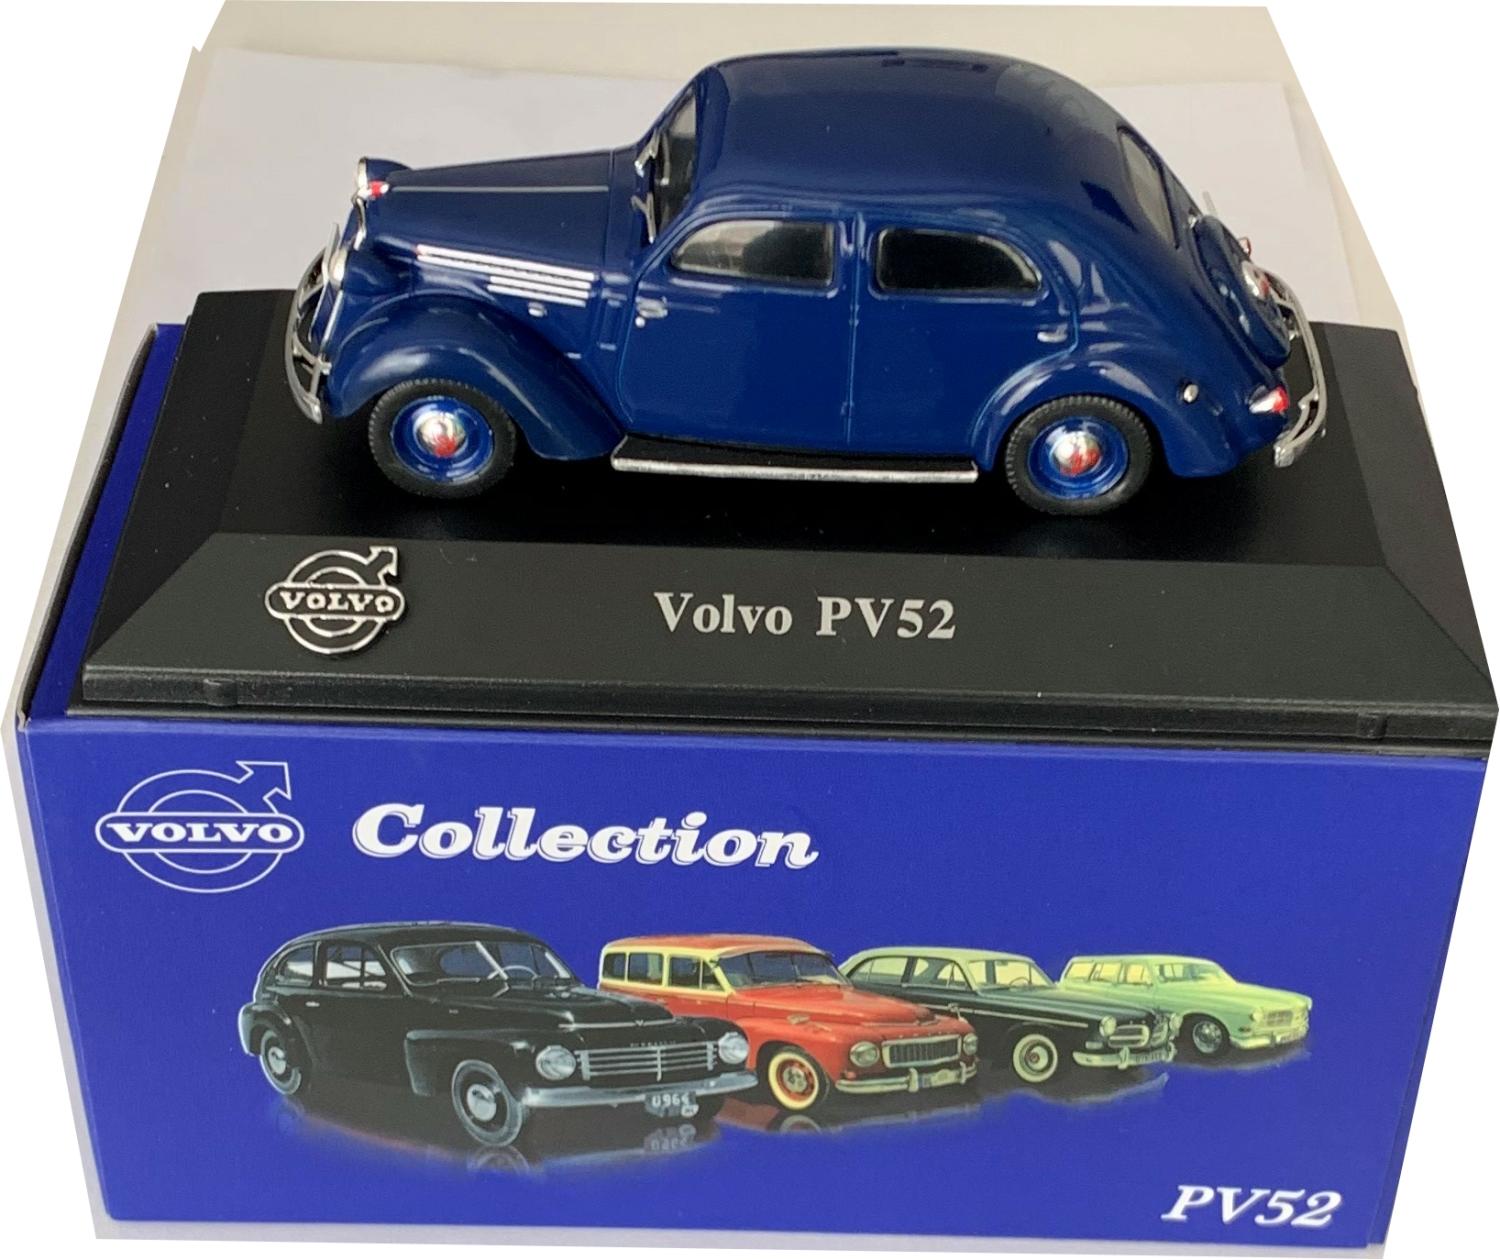 Volvo PV52 in blue 1:43 scale